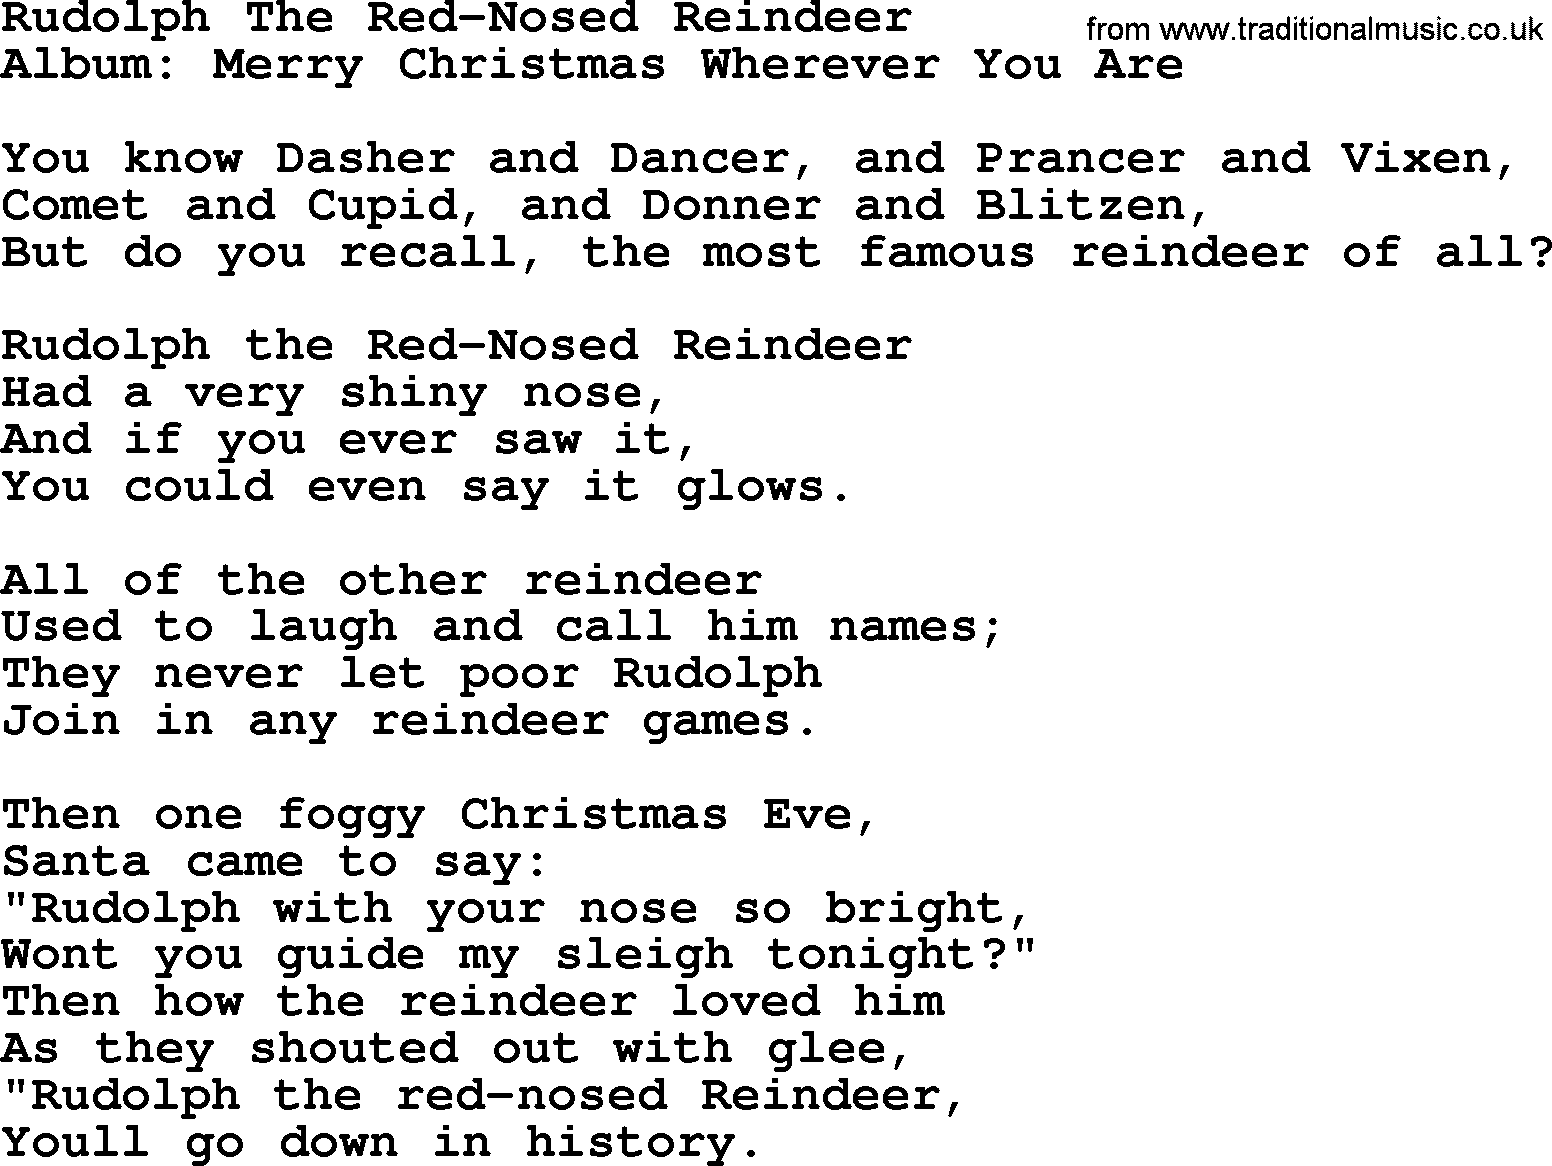 Rudolph The Red-Nosed Reindeer, by George Strait - lyrics